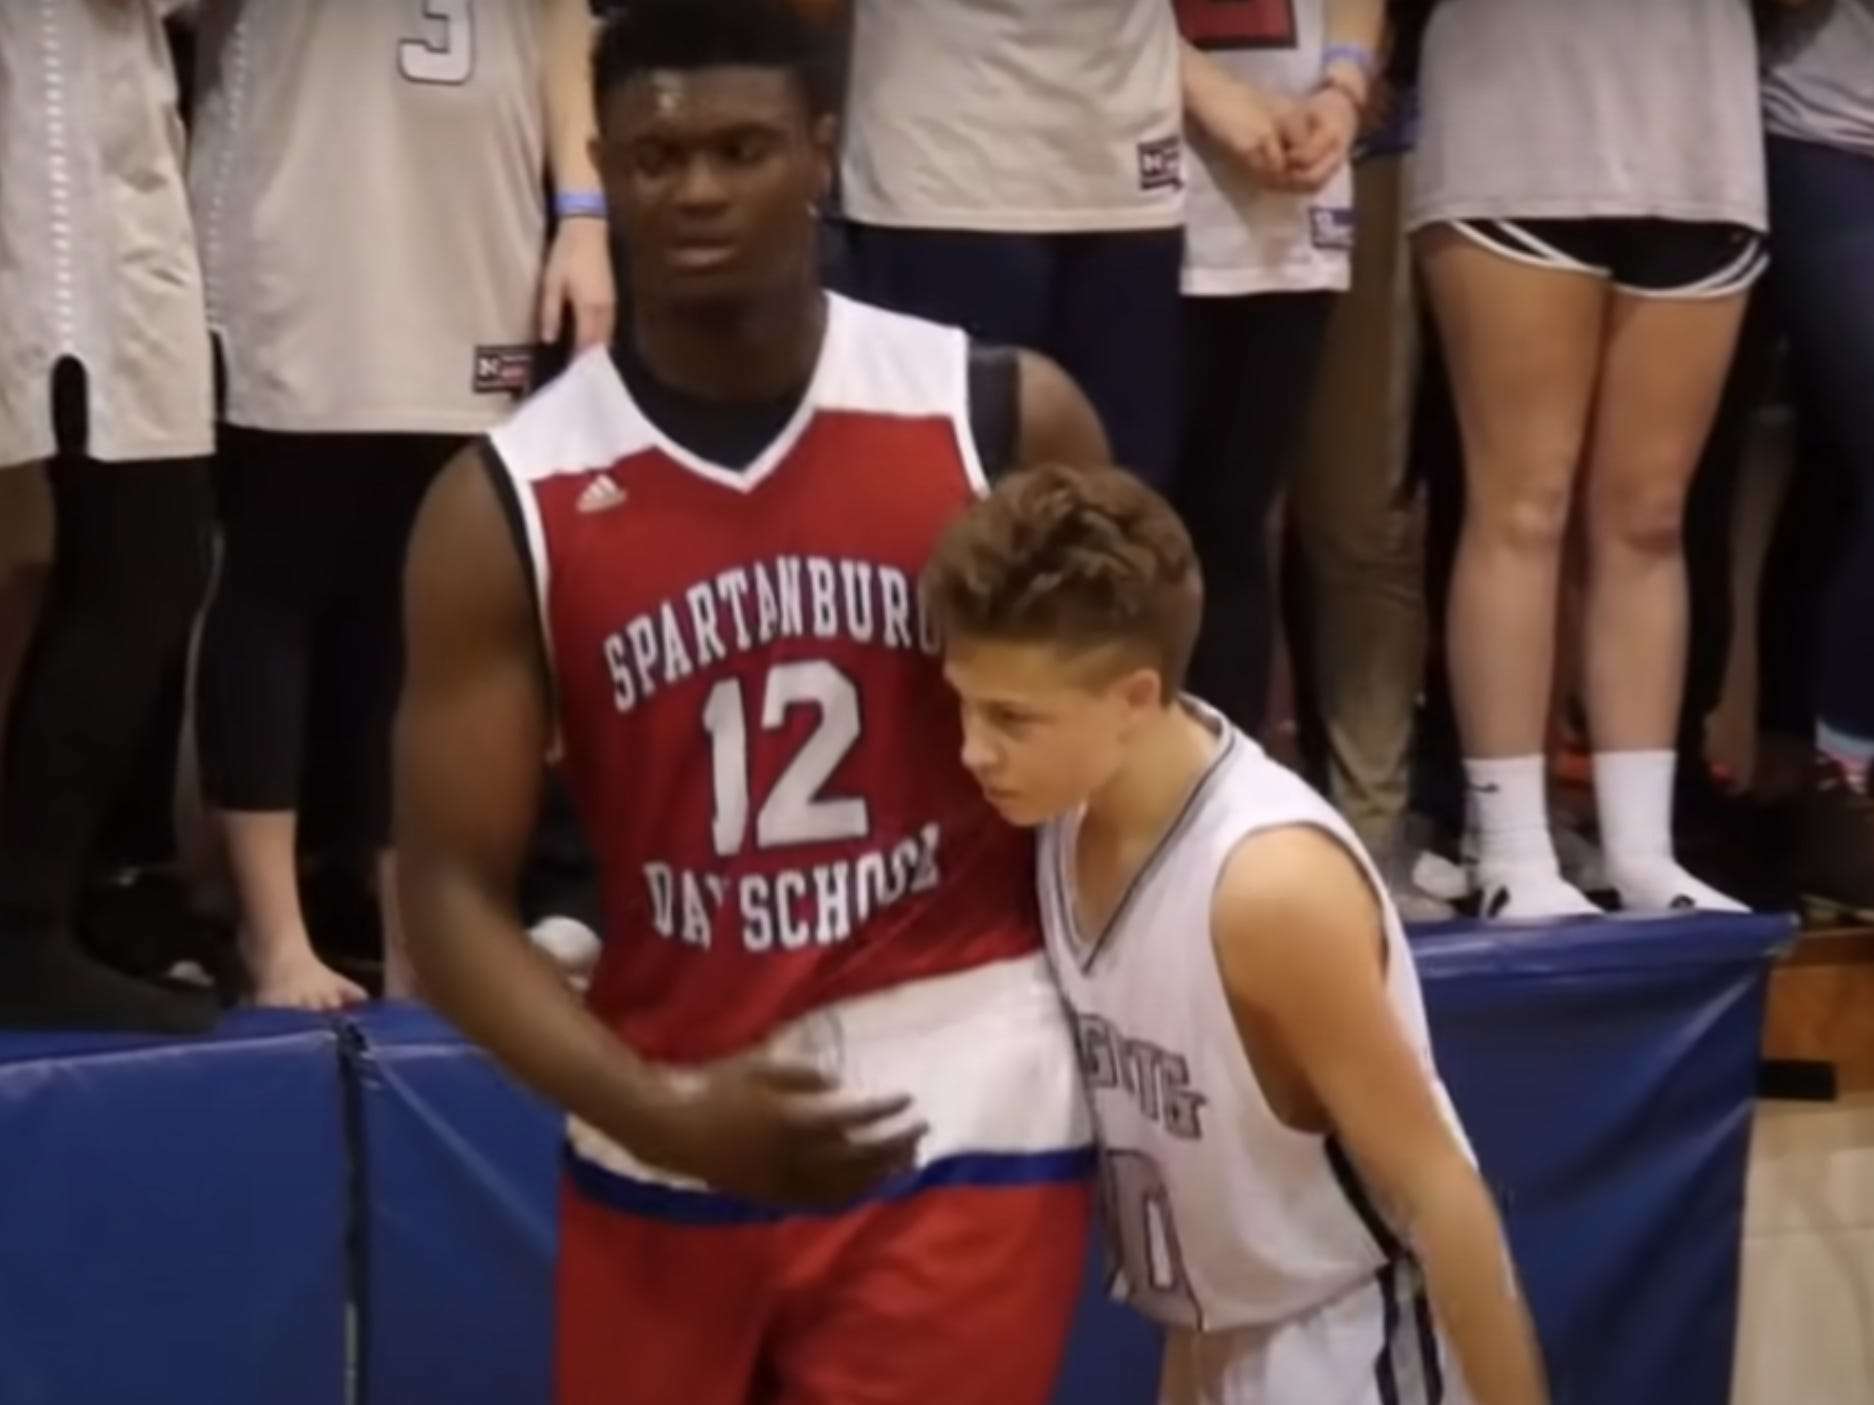 WATCH: Funny clip shows Zion Williamson towering over defender